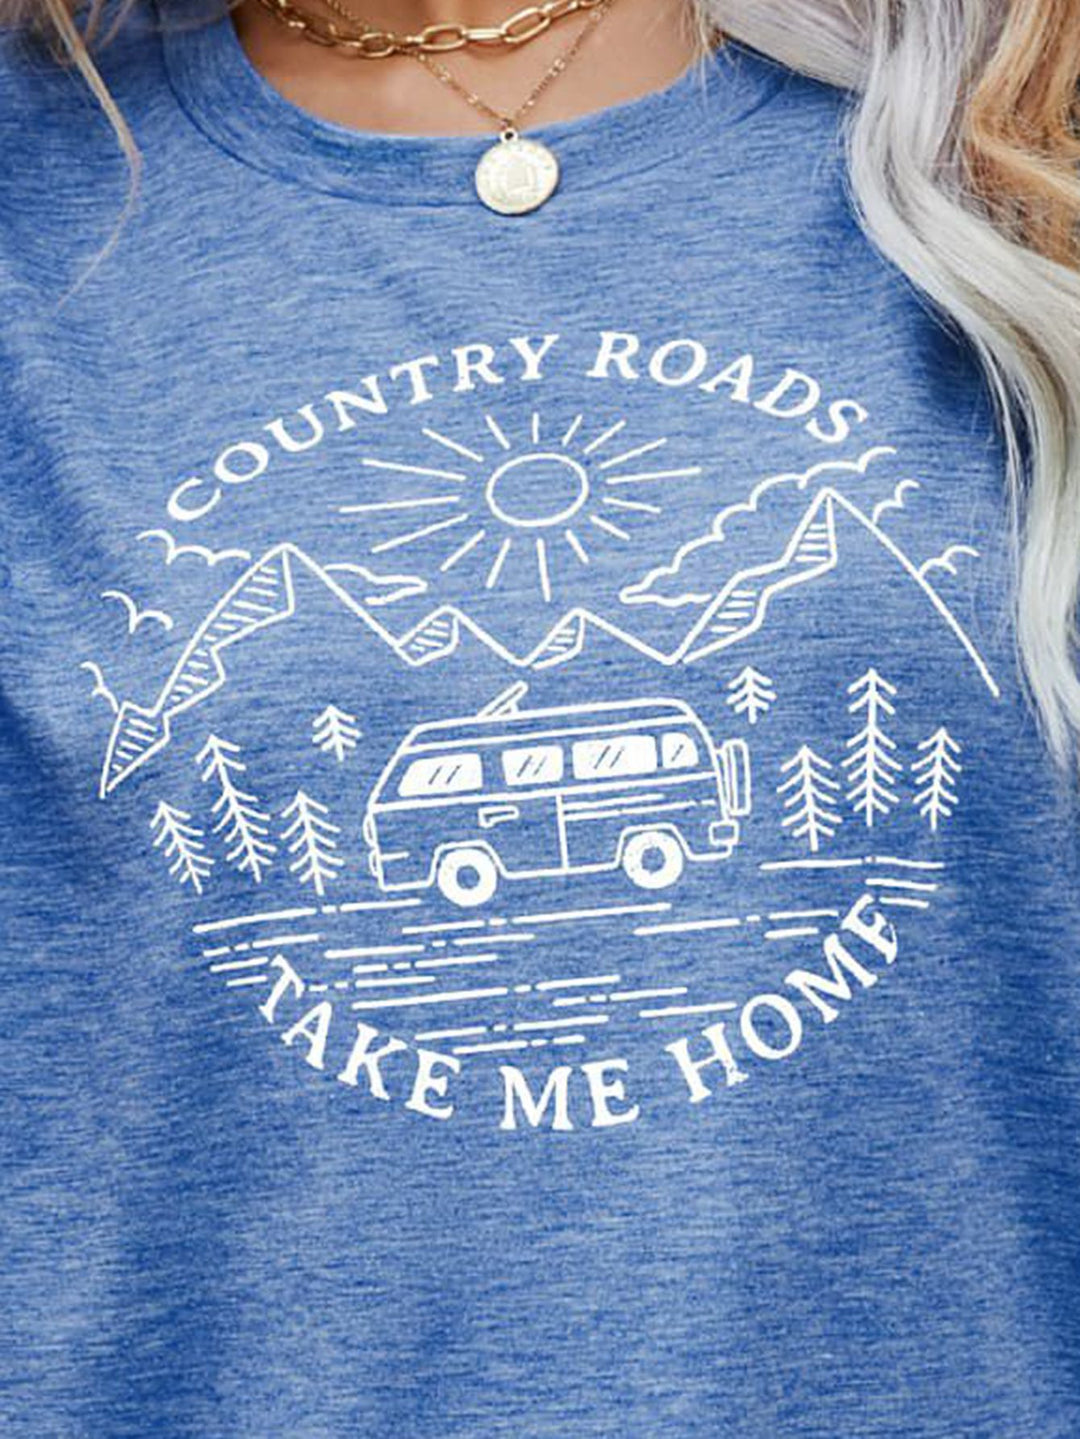 COUNTRY ROADS TAKE ME HOME Graphic Tee